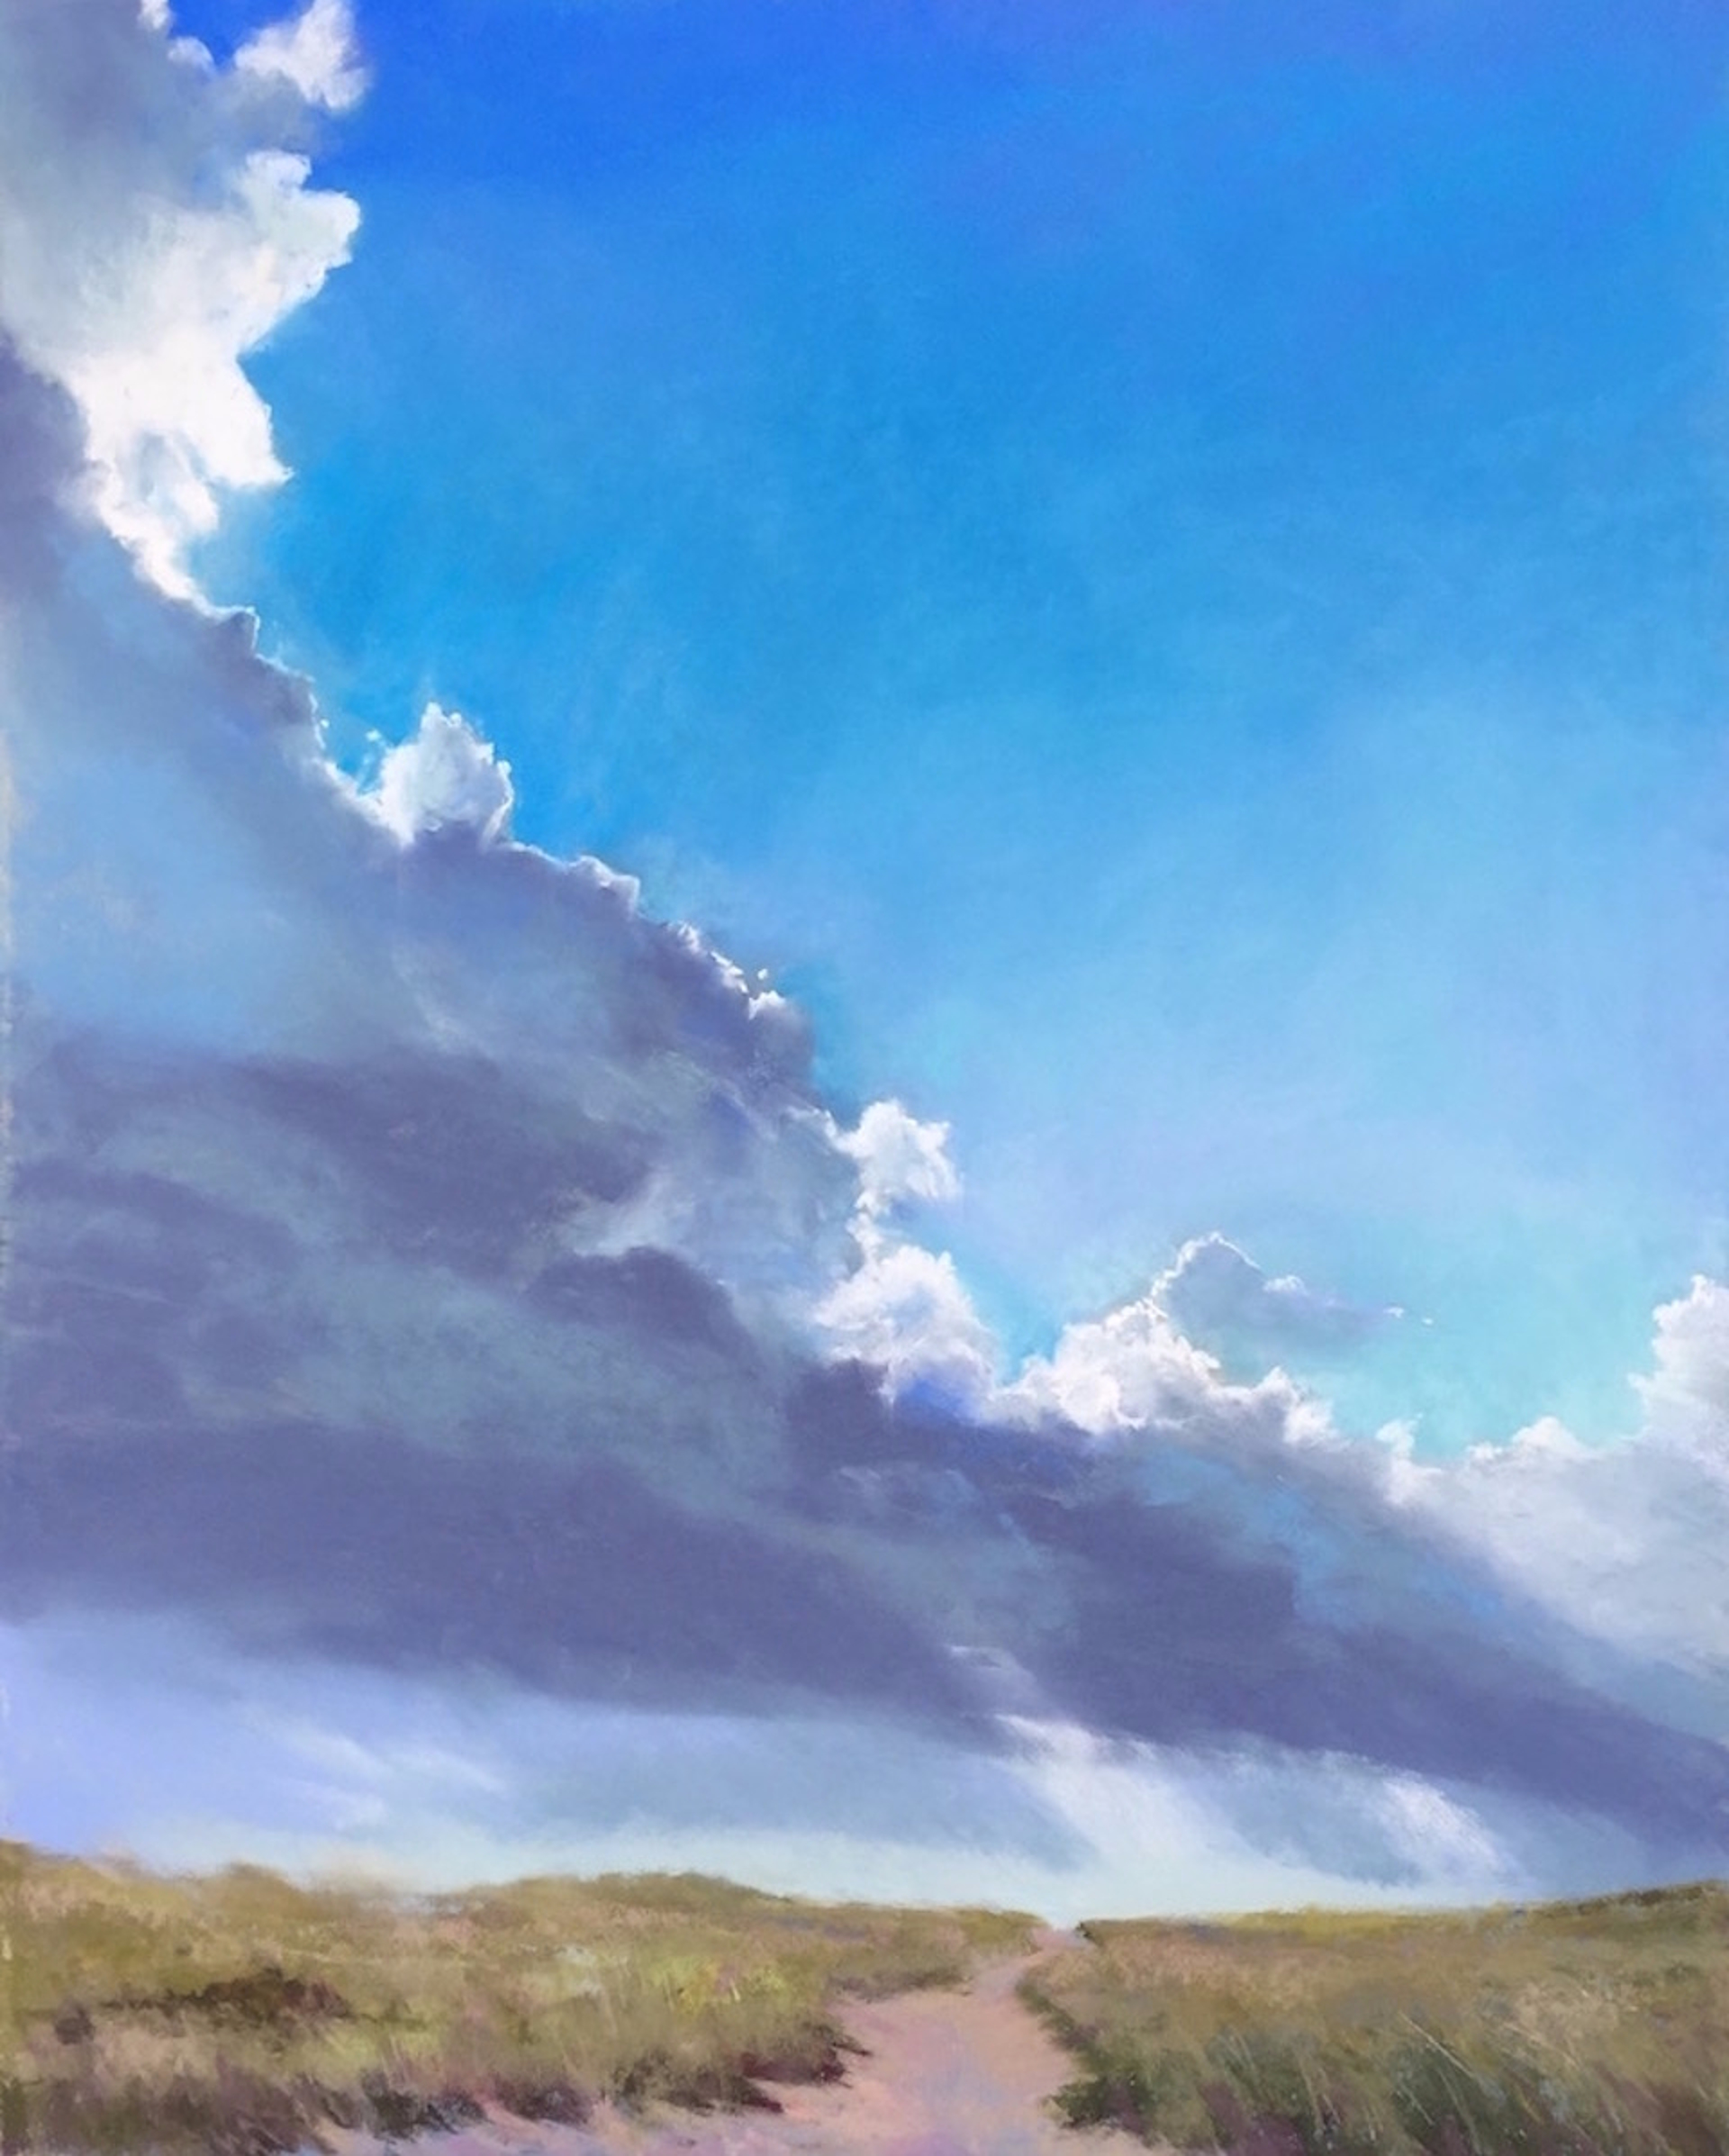 Clearing Skies by Jeanne Rosier Smith